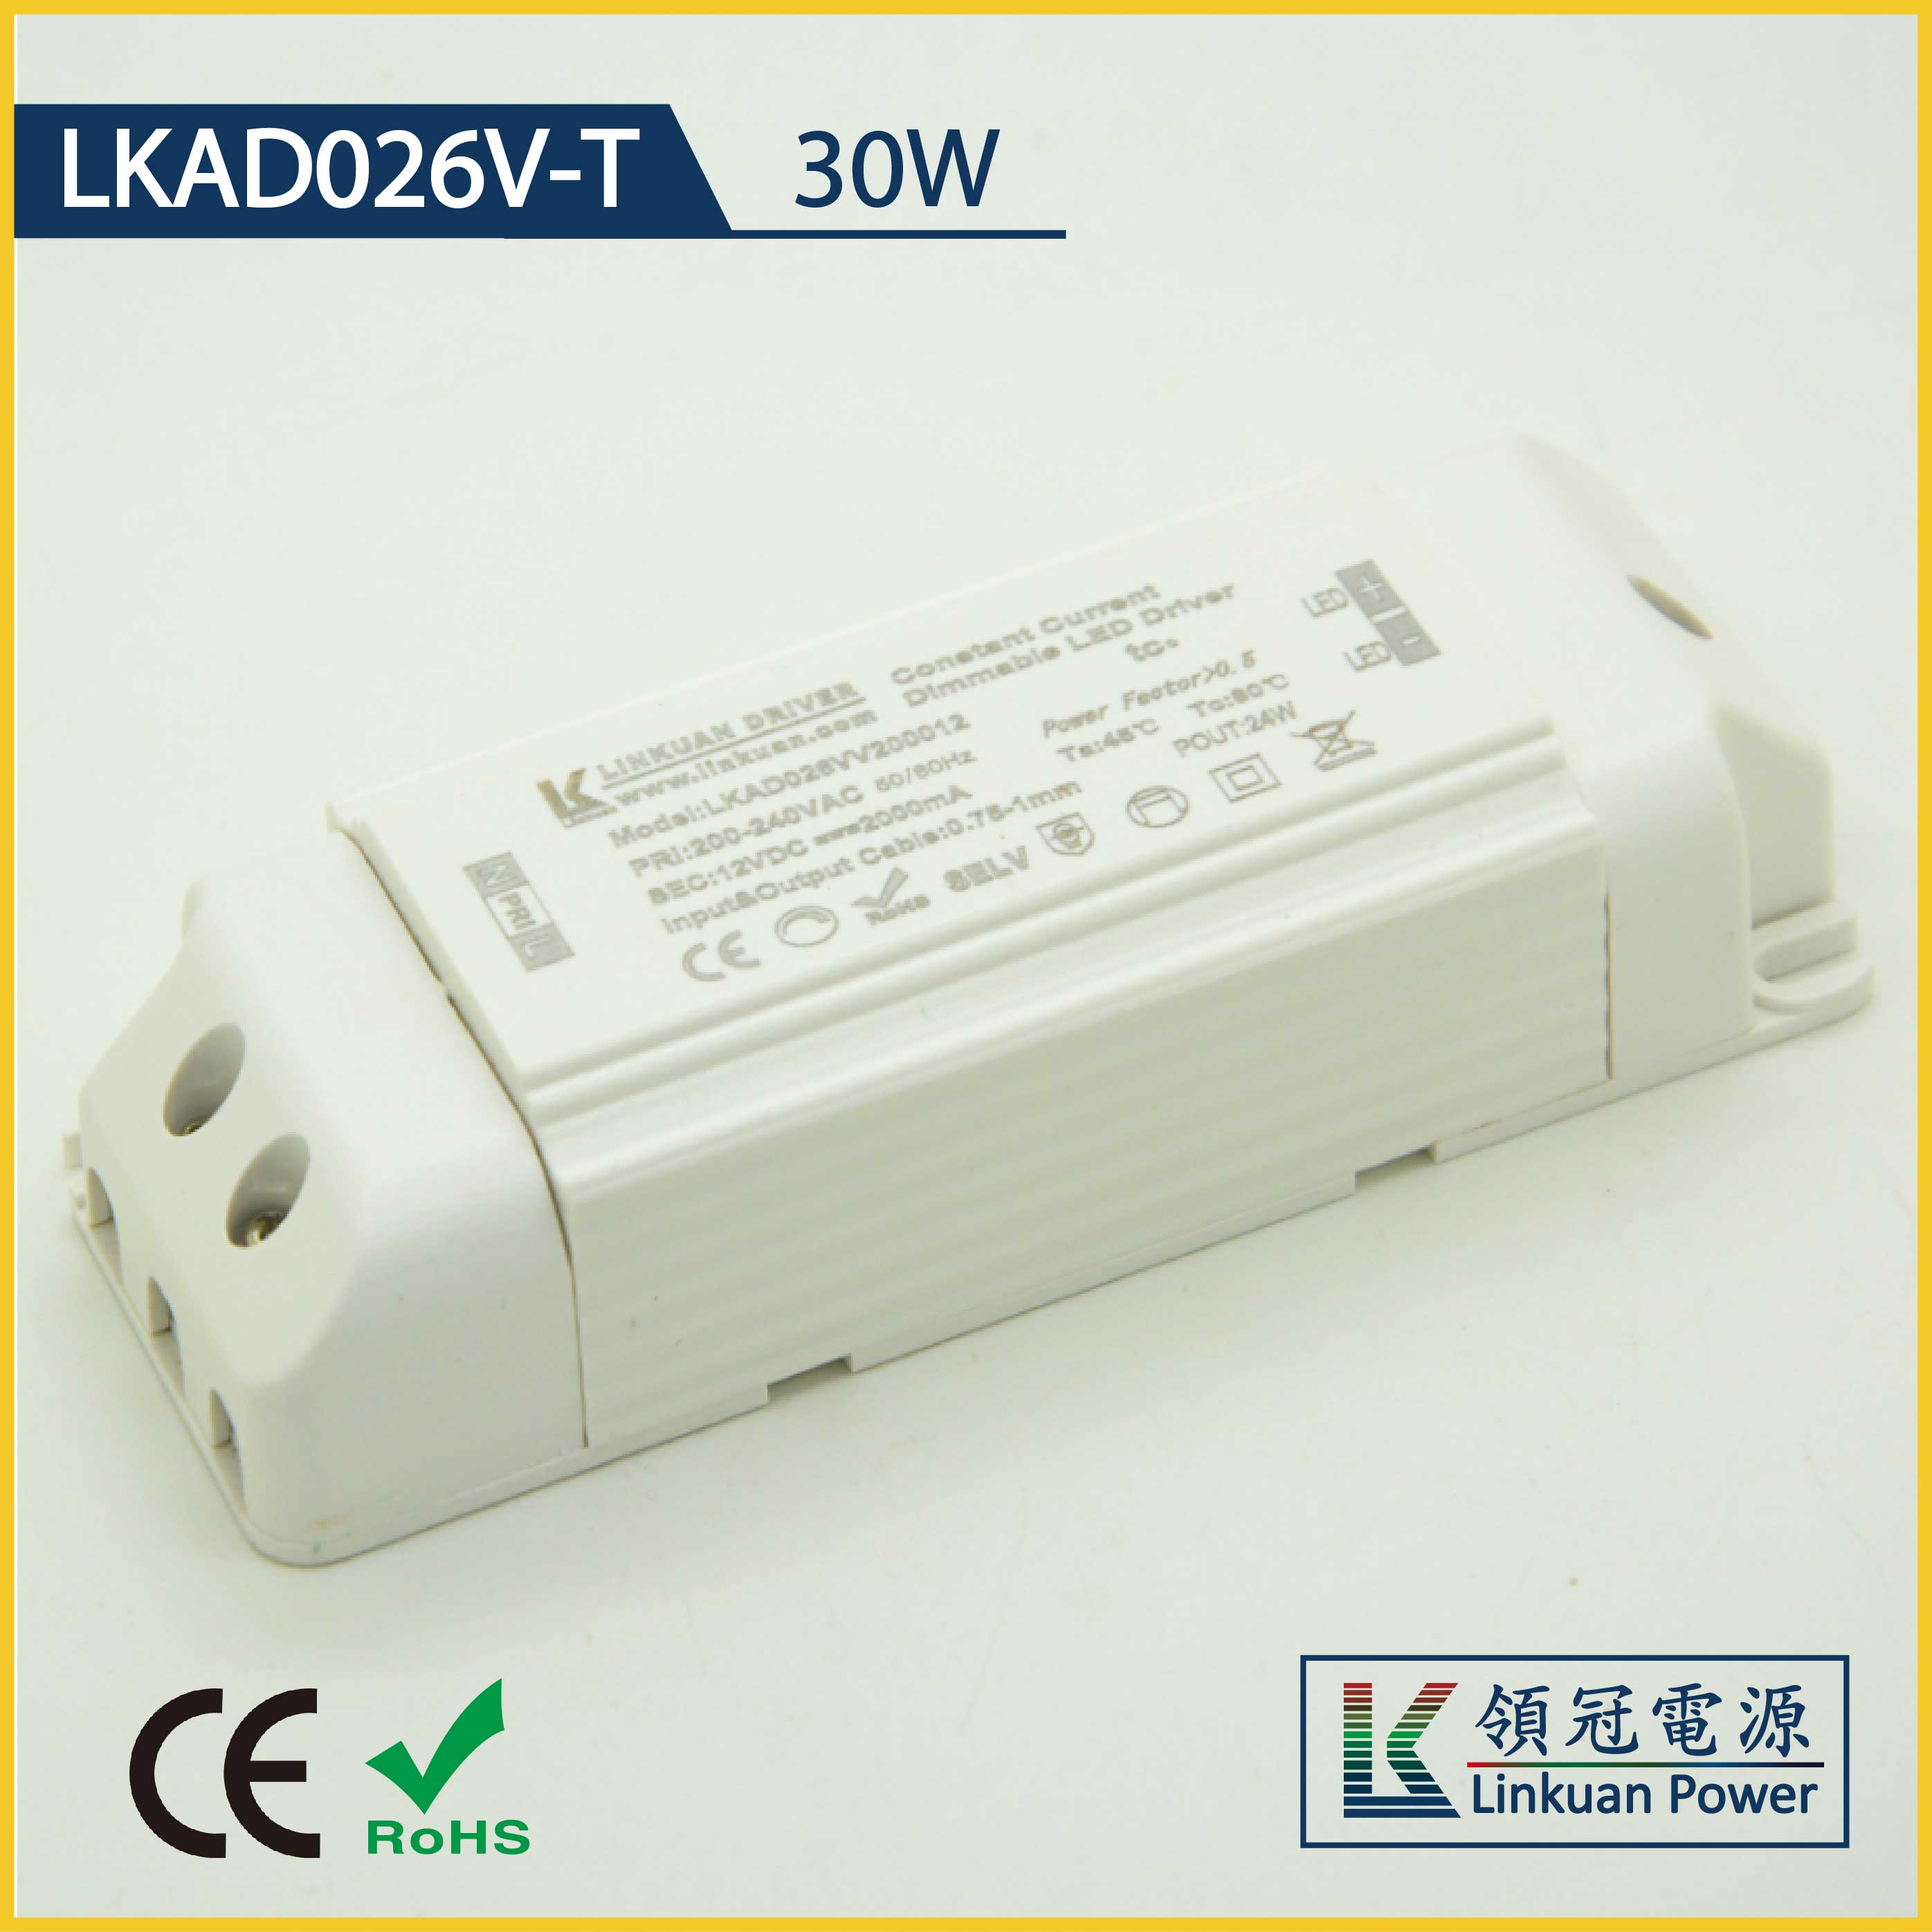 LKAD026V-T 30W constant voltage 12/24V 4A/2A triac dimmable led driver